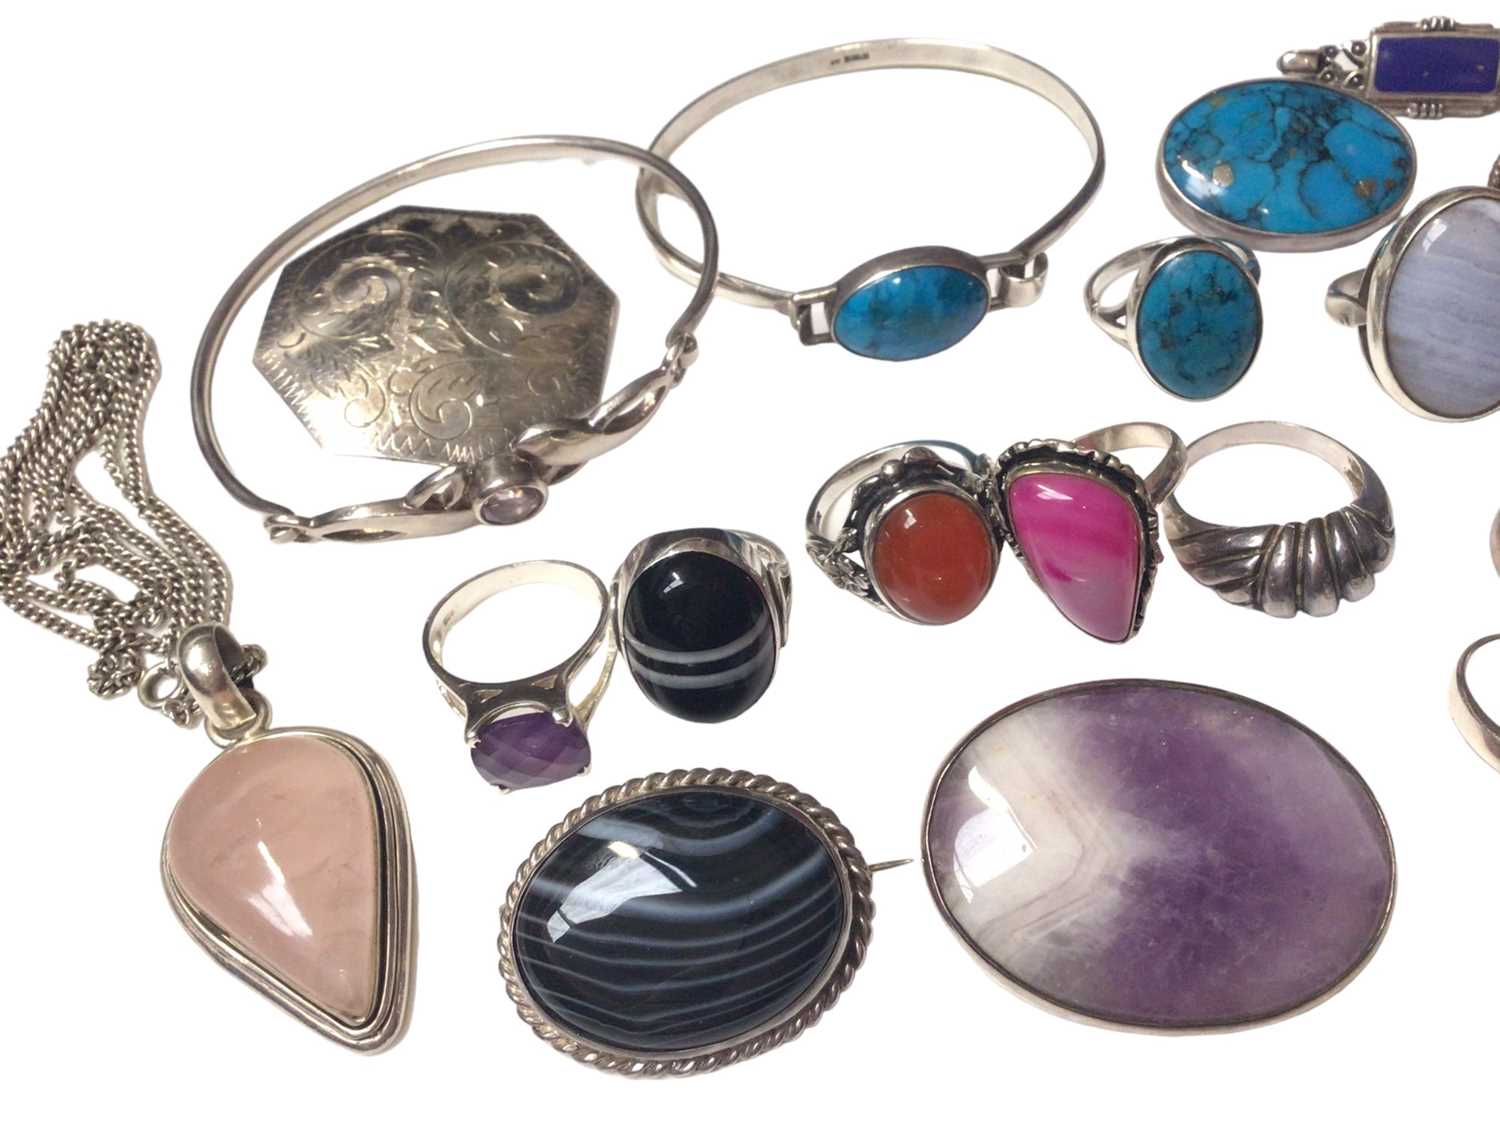 Group of silver and white metal jewellery set with semi-precious gemstones - Image 2 of 3